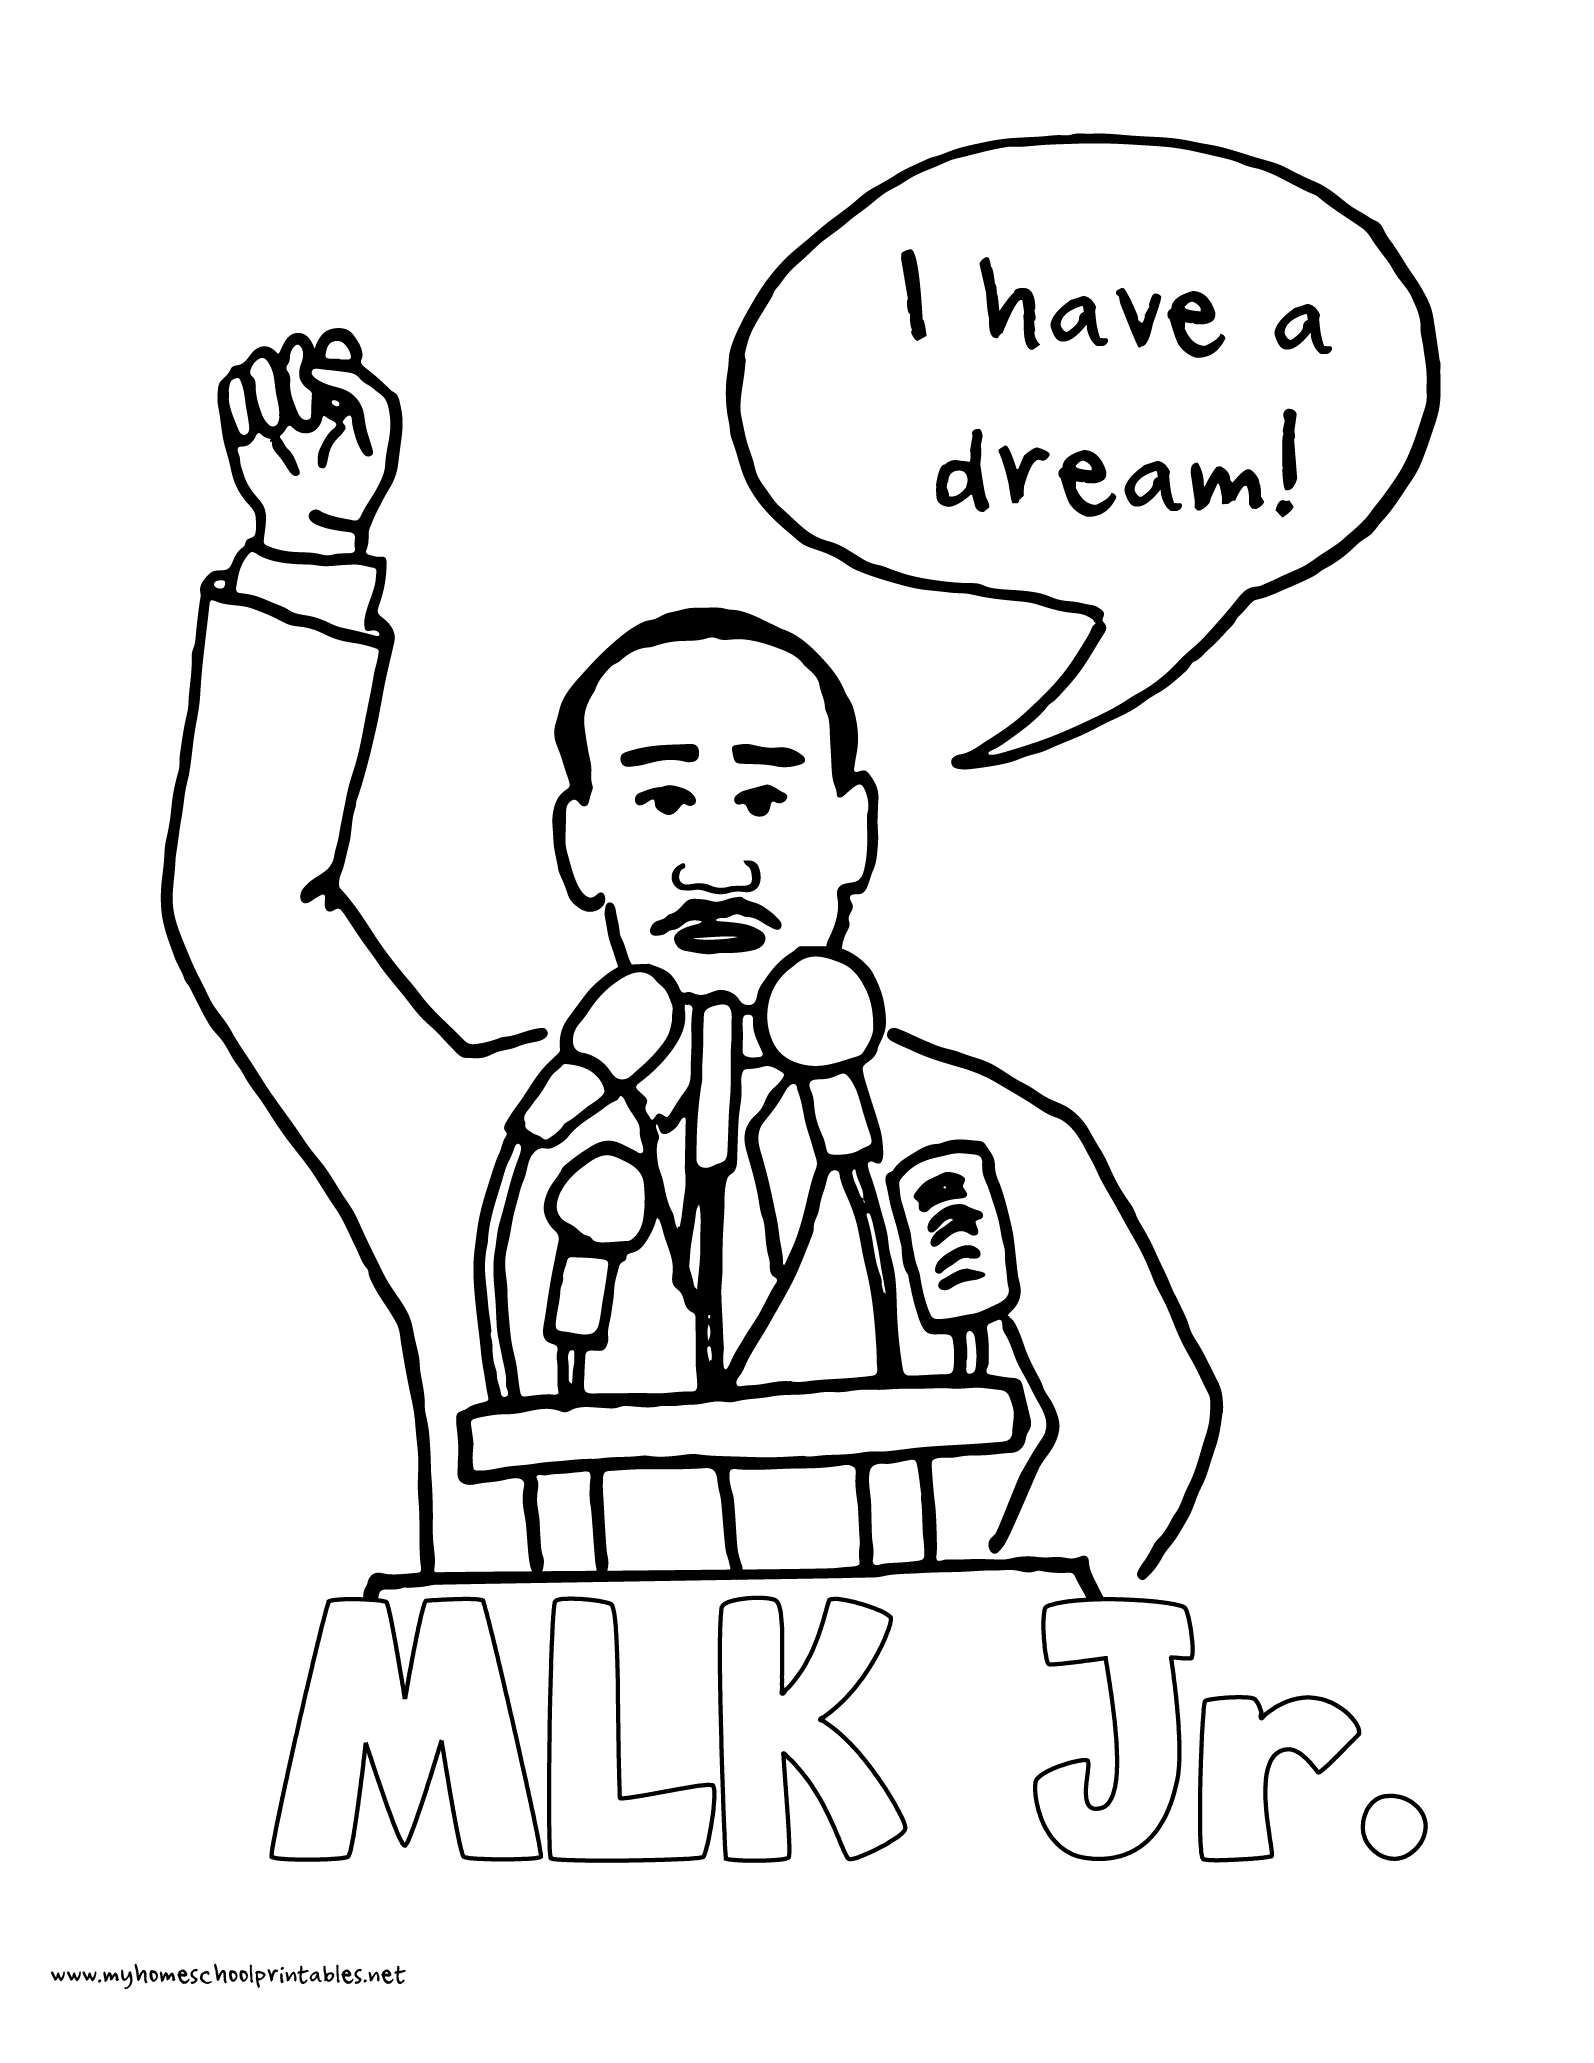 Martin Luther King Coloring Pages Printable at GetColorings com Free